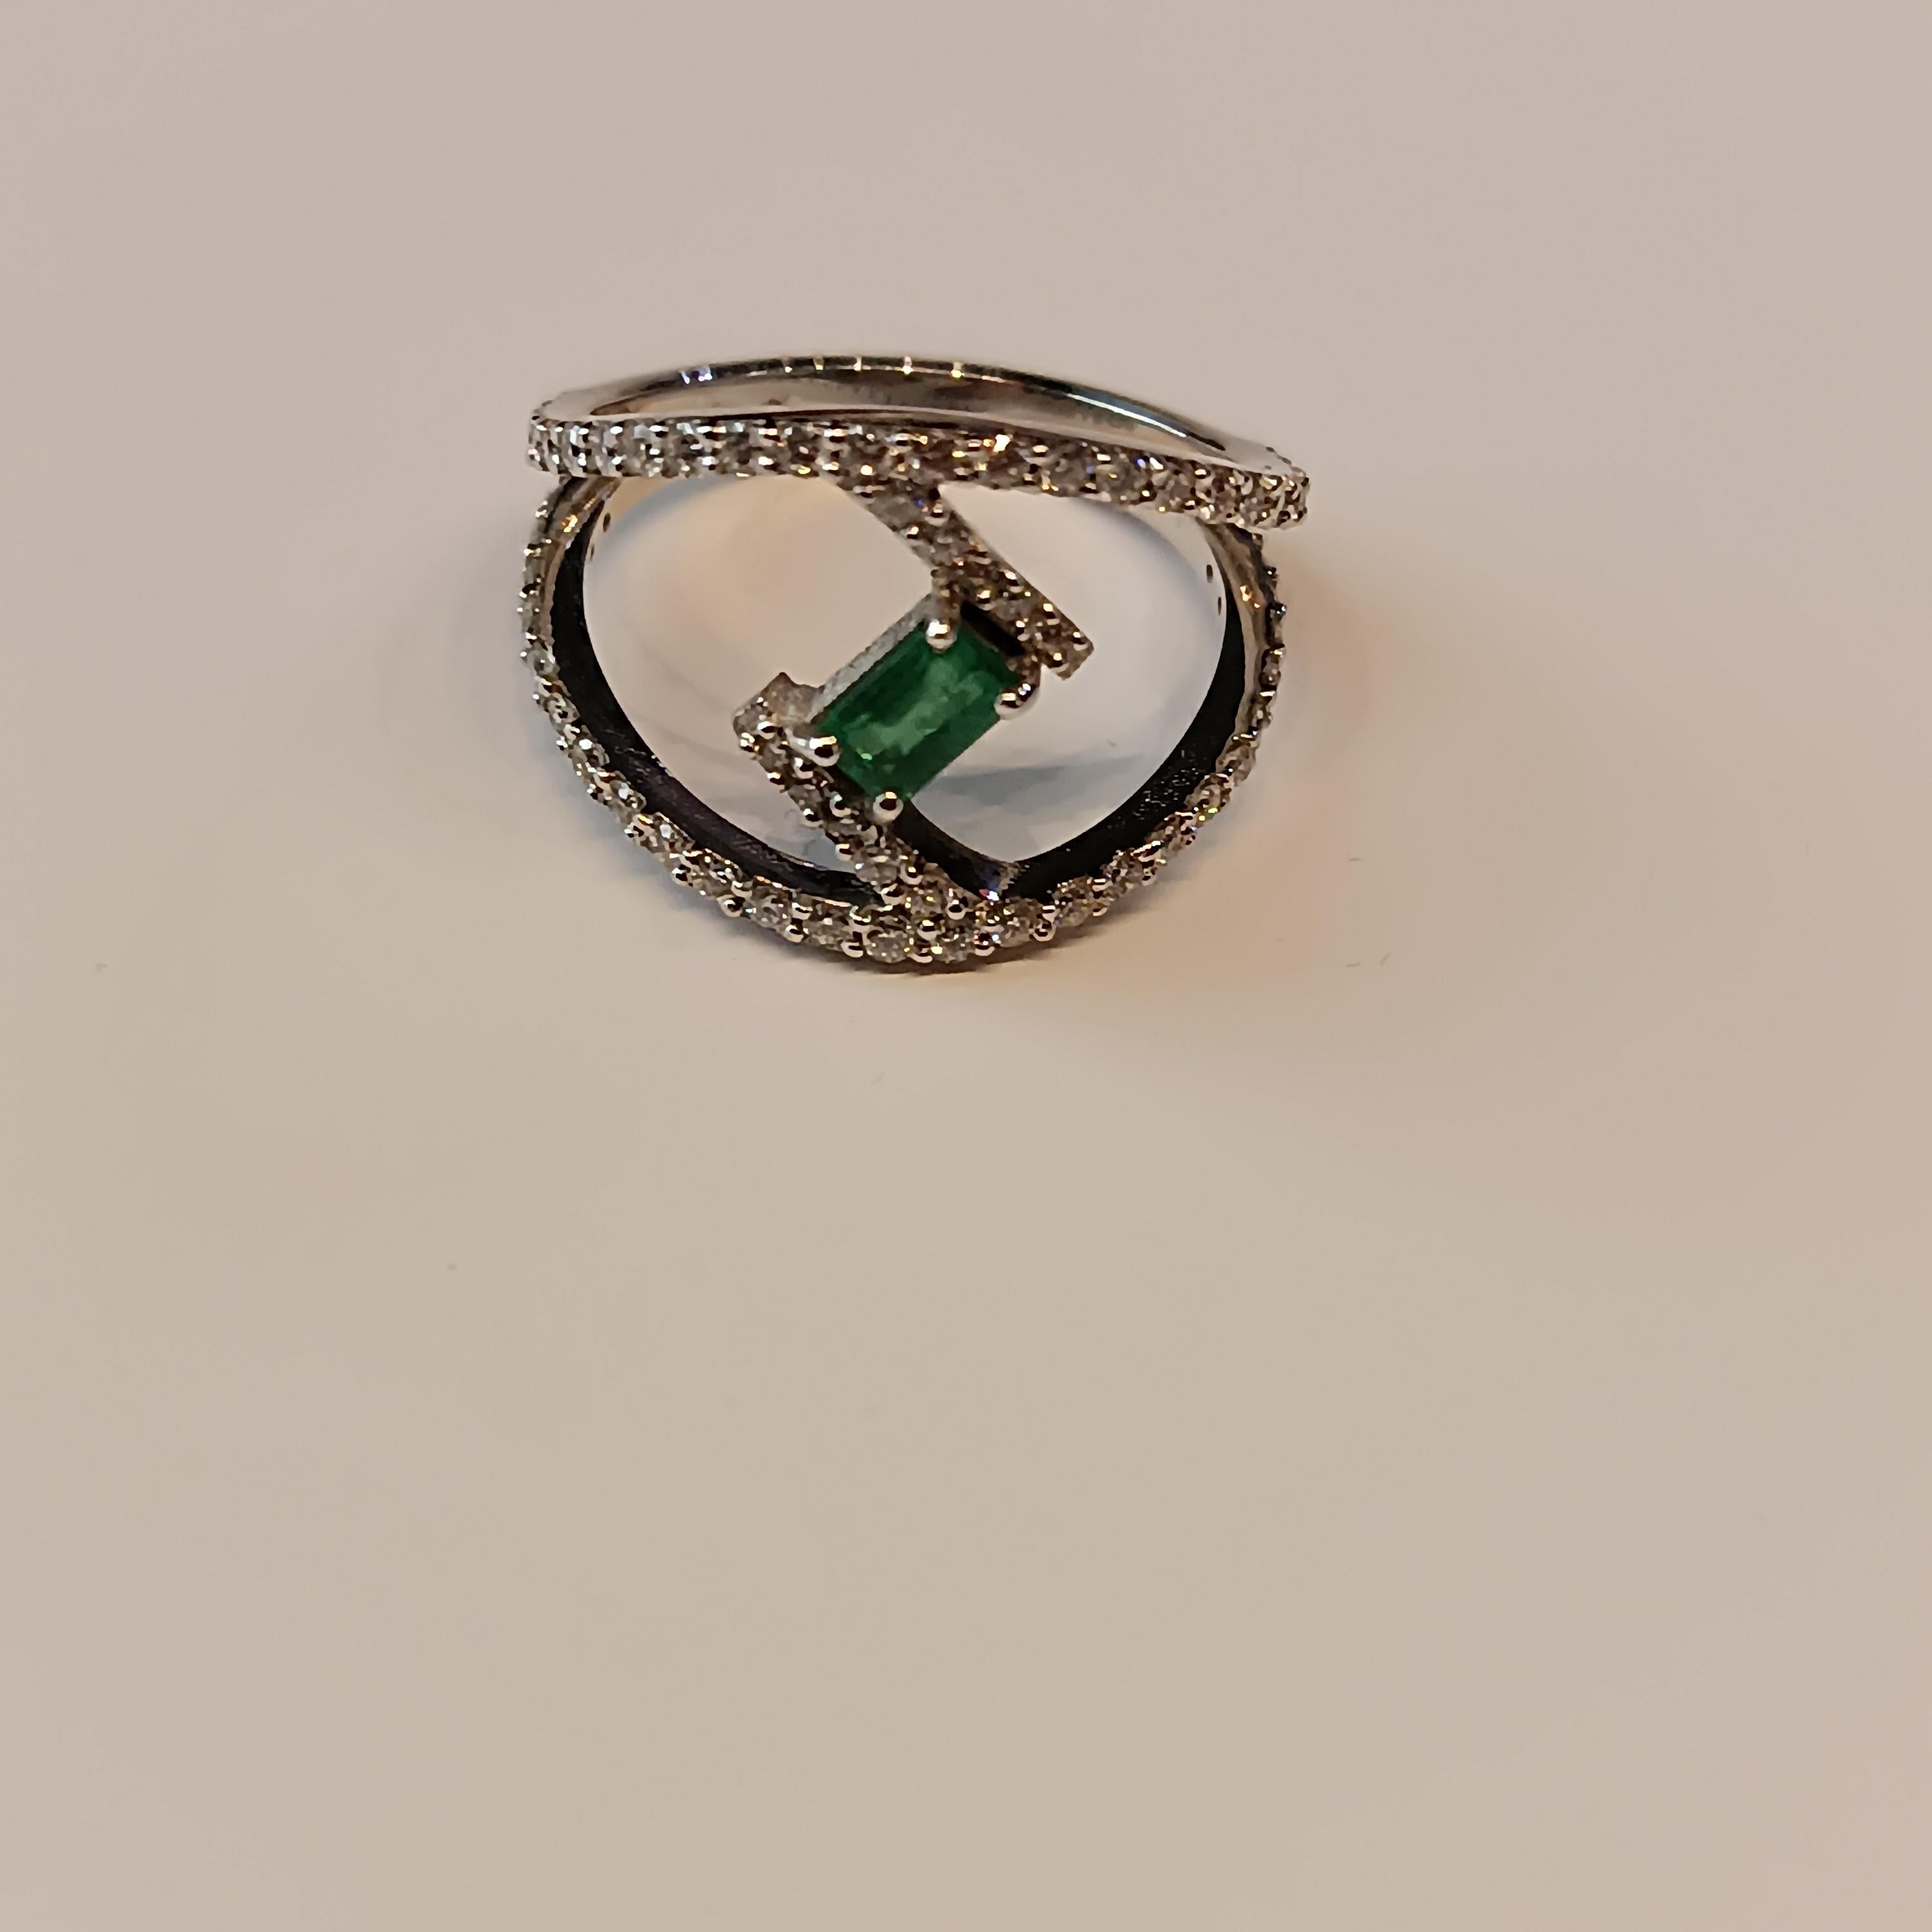 modern design 18 carat Withe gold Ring with VS G color. baguette cut emeralds of .03 carat each adorned with 0.64 diamonds for a total of 0.64 carats. total gross weight gr. 3.94 Ring size 54
This ring designed by Leo Milano is one of our bestseller